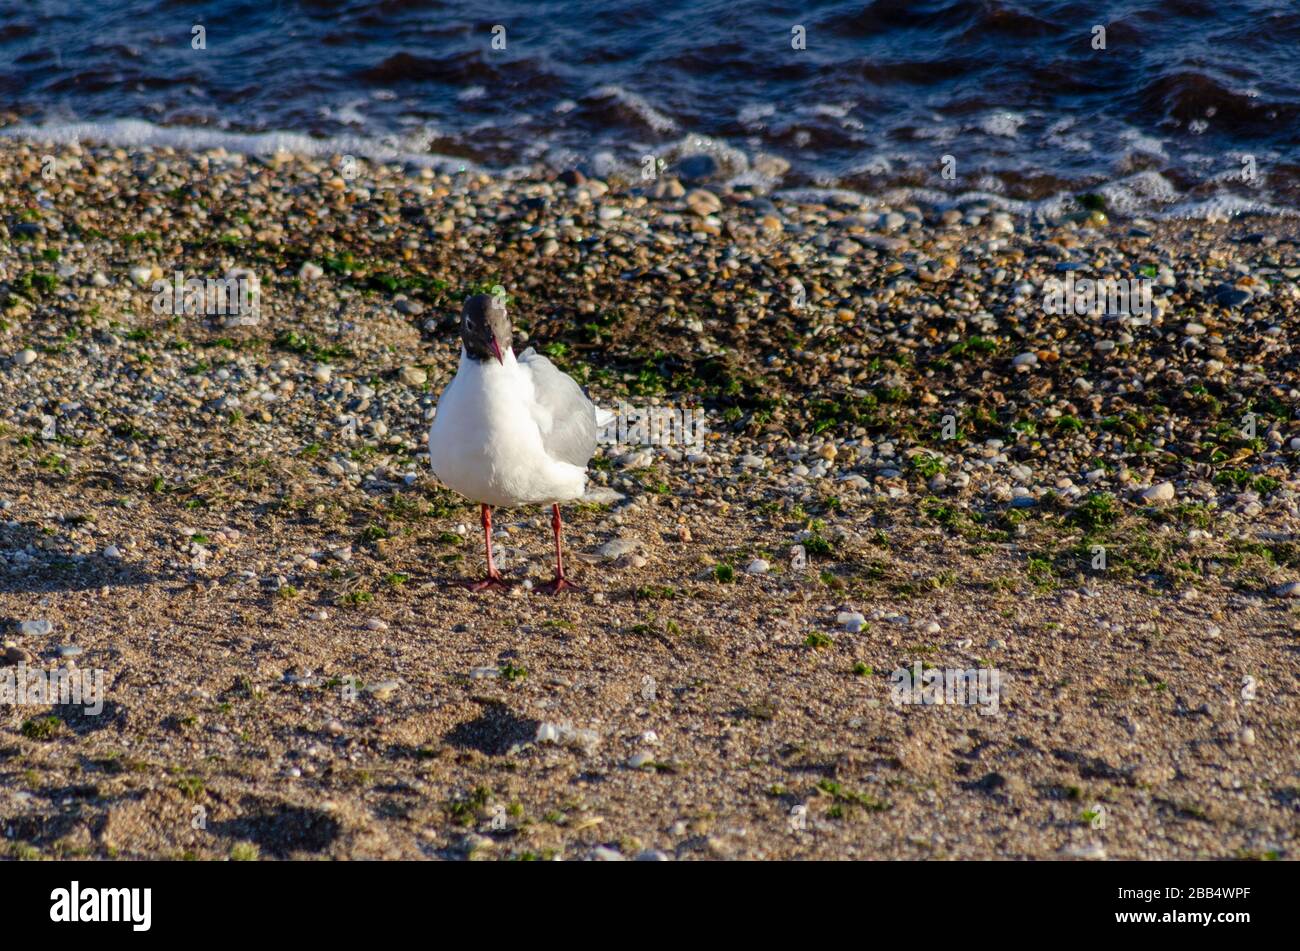 A Mediterranean gull ( Larus melanocephalus ) on a beach in Alexandroupoli Greece. The gulls are just beginning to loose their winter plumage as sprin Stock Photo